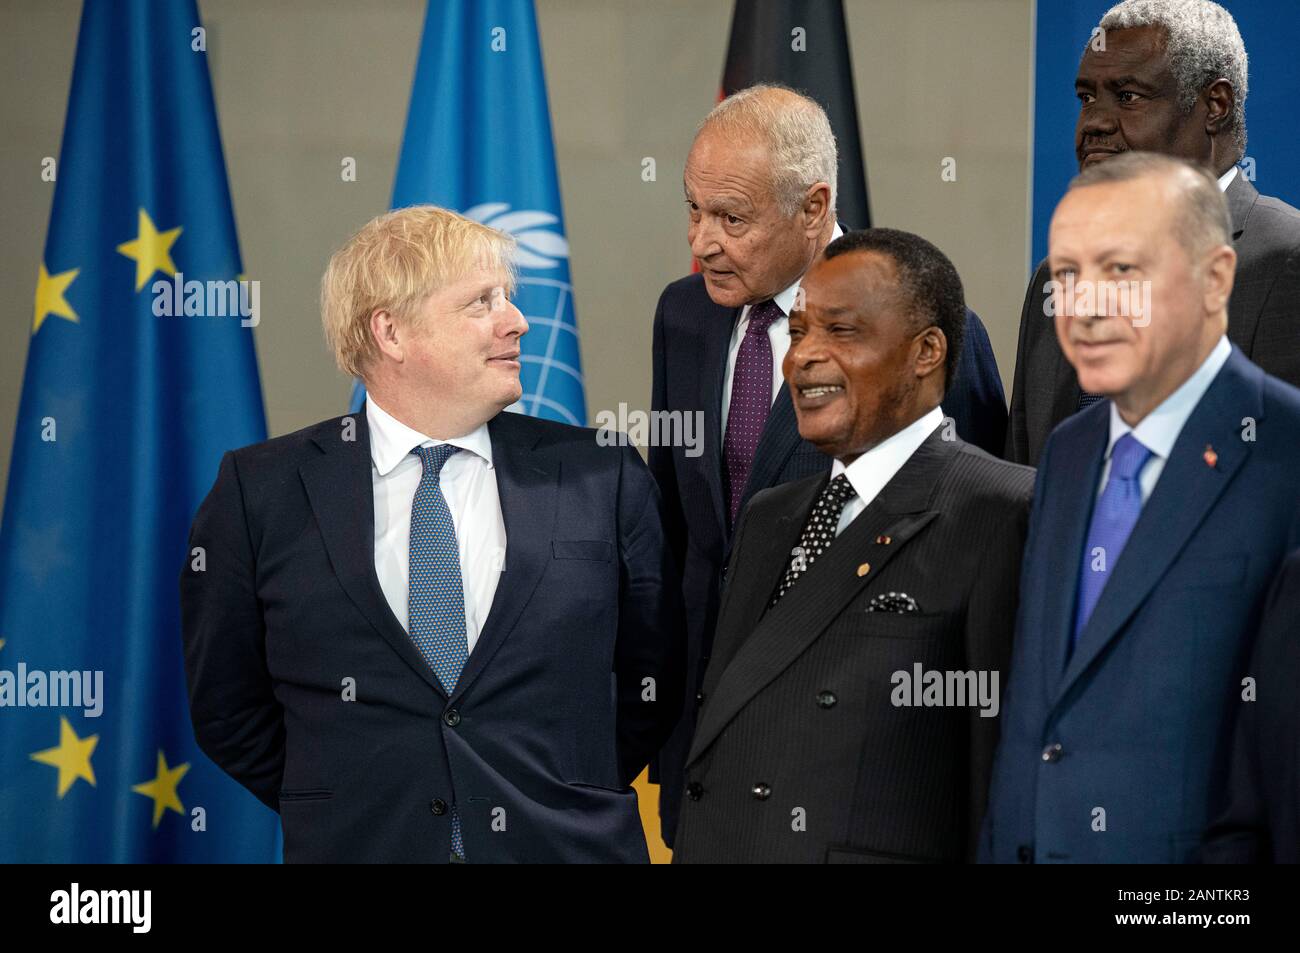 Berlin, Germany. 19th Jan, 2020. At the family photo, (front, l-r) Boris Johnson, Prime Minister of Great Britain, Denis Sassou Nguesso, President of the Congo, Recep Tayyip Erdogan, President of Turkey, (2nd row, l-r) Ahmed Aboulgheit Secretary General of the Arab League, Moussa Faki, Chairman of the African Union, meet in the Federal Chancellery at the beginning of the Libya Conference at the family photo. The aim of the conference is a lasting ceasefire in the civil war country. Credit: Fabian Sommer/dpa/Alamy Live News Stock Photo